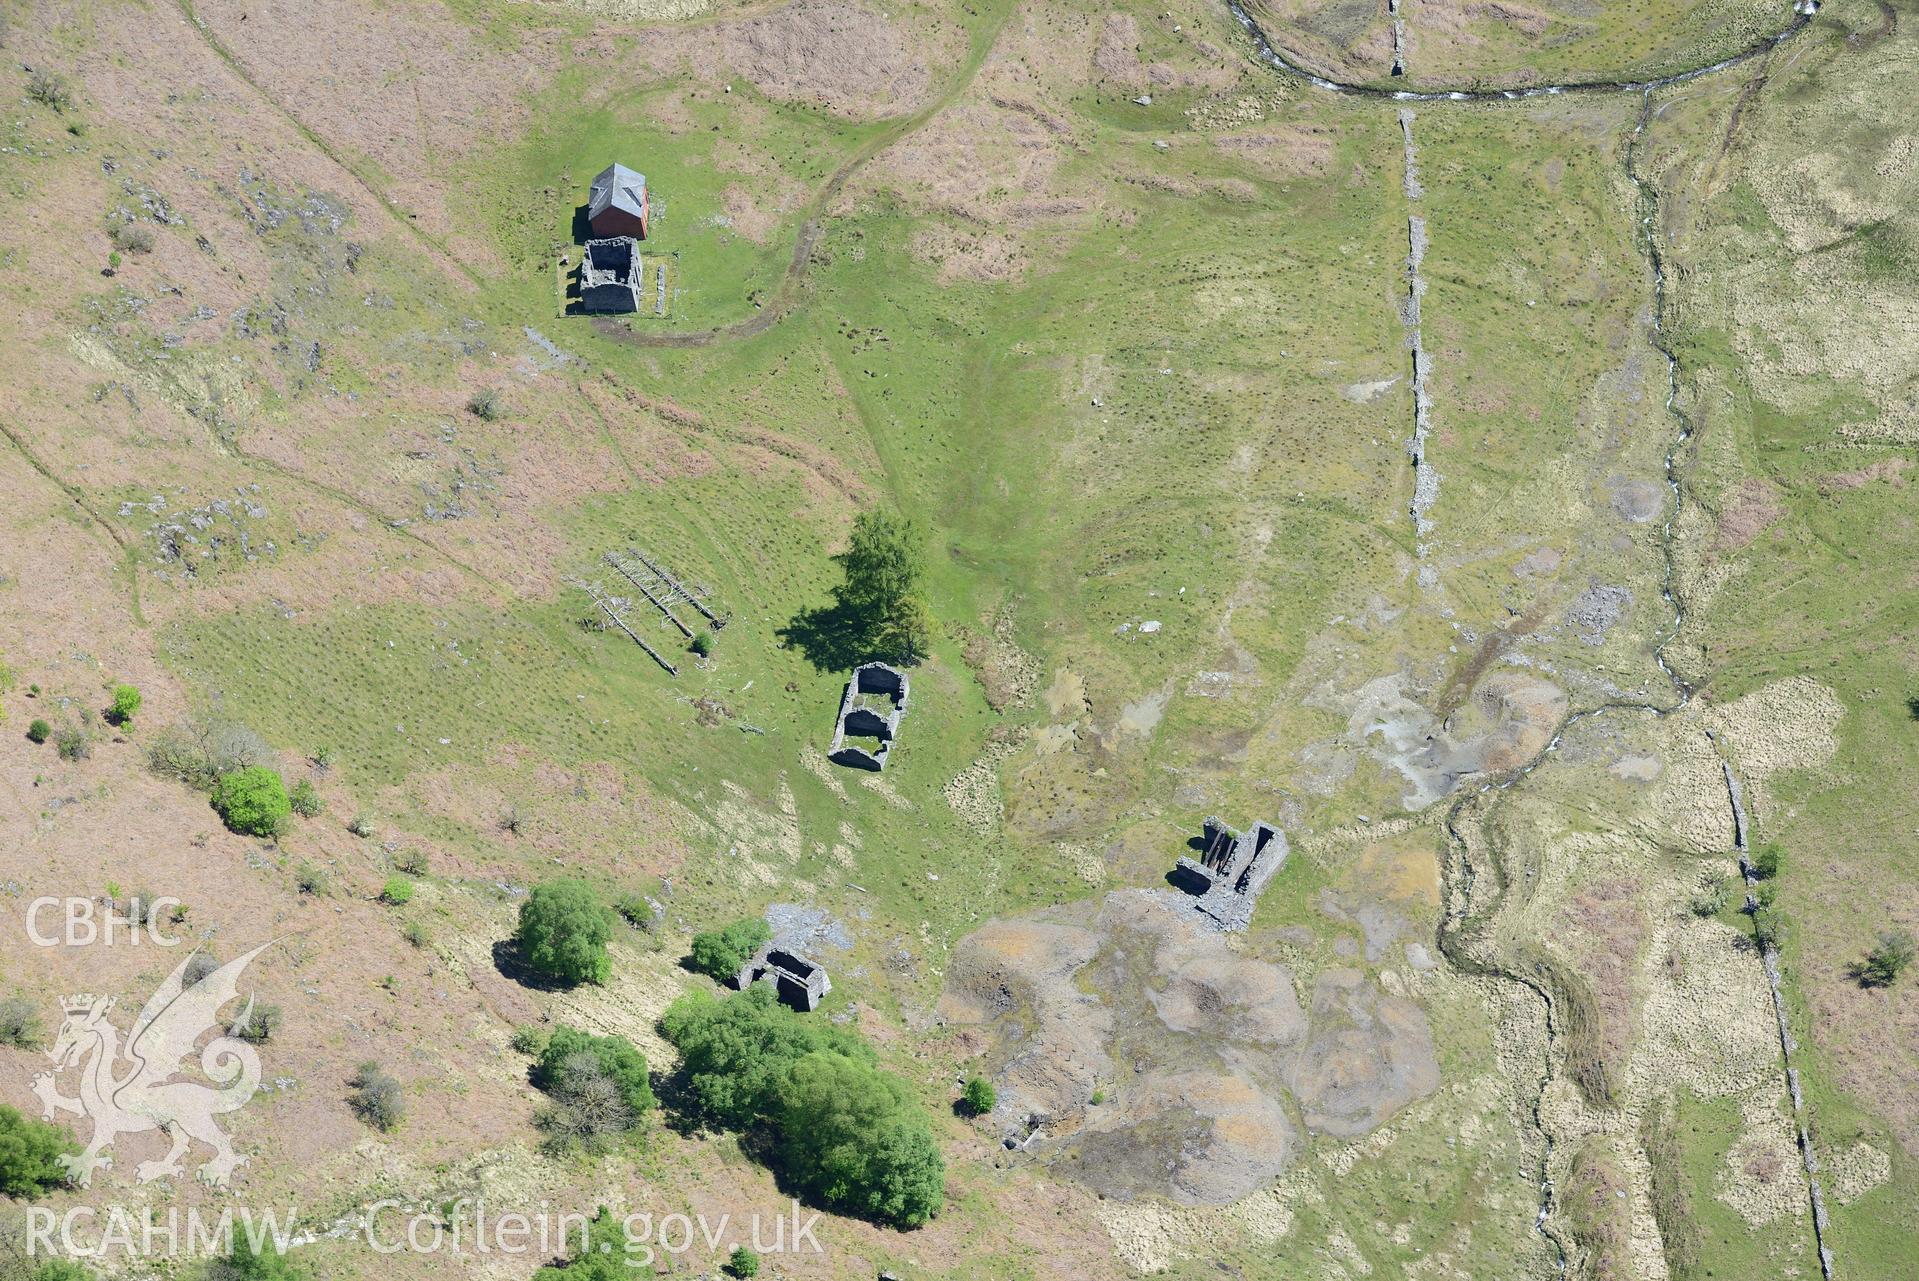 Cwm Elan lead mine complex, including the remains of a house, office, quarry, mine shaft and wheel pit. Oblique aerial photograph taken during the Royal Commission's programme of archaeological aerial reconnaissance by Toby Driver on 3rd June 2015.